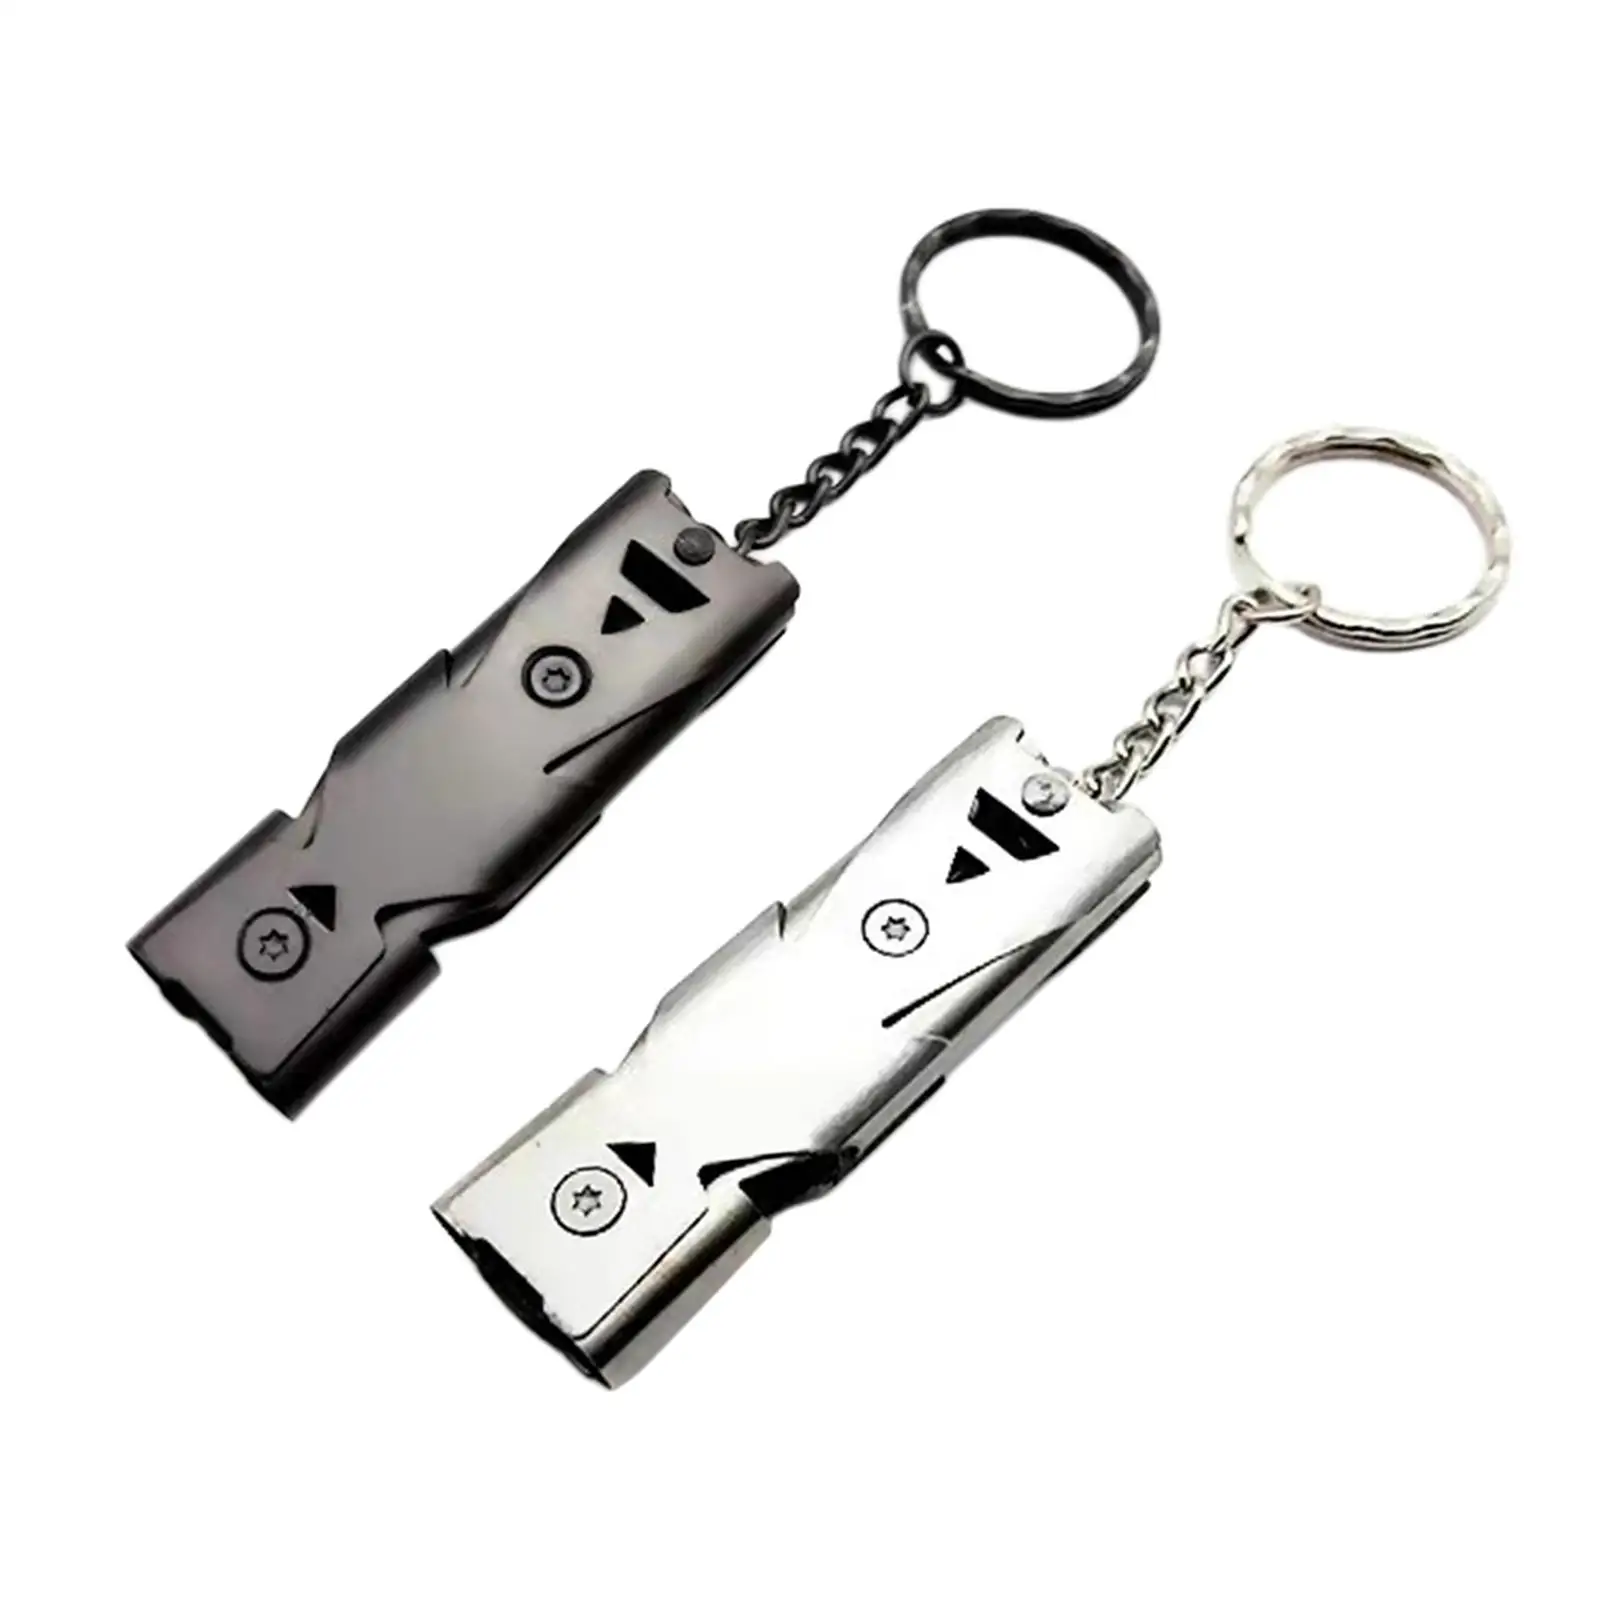 Portable Emergency Whistle, Double Tube with Key Chain High Decibel Equipment Accessory for Outdoor